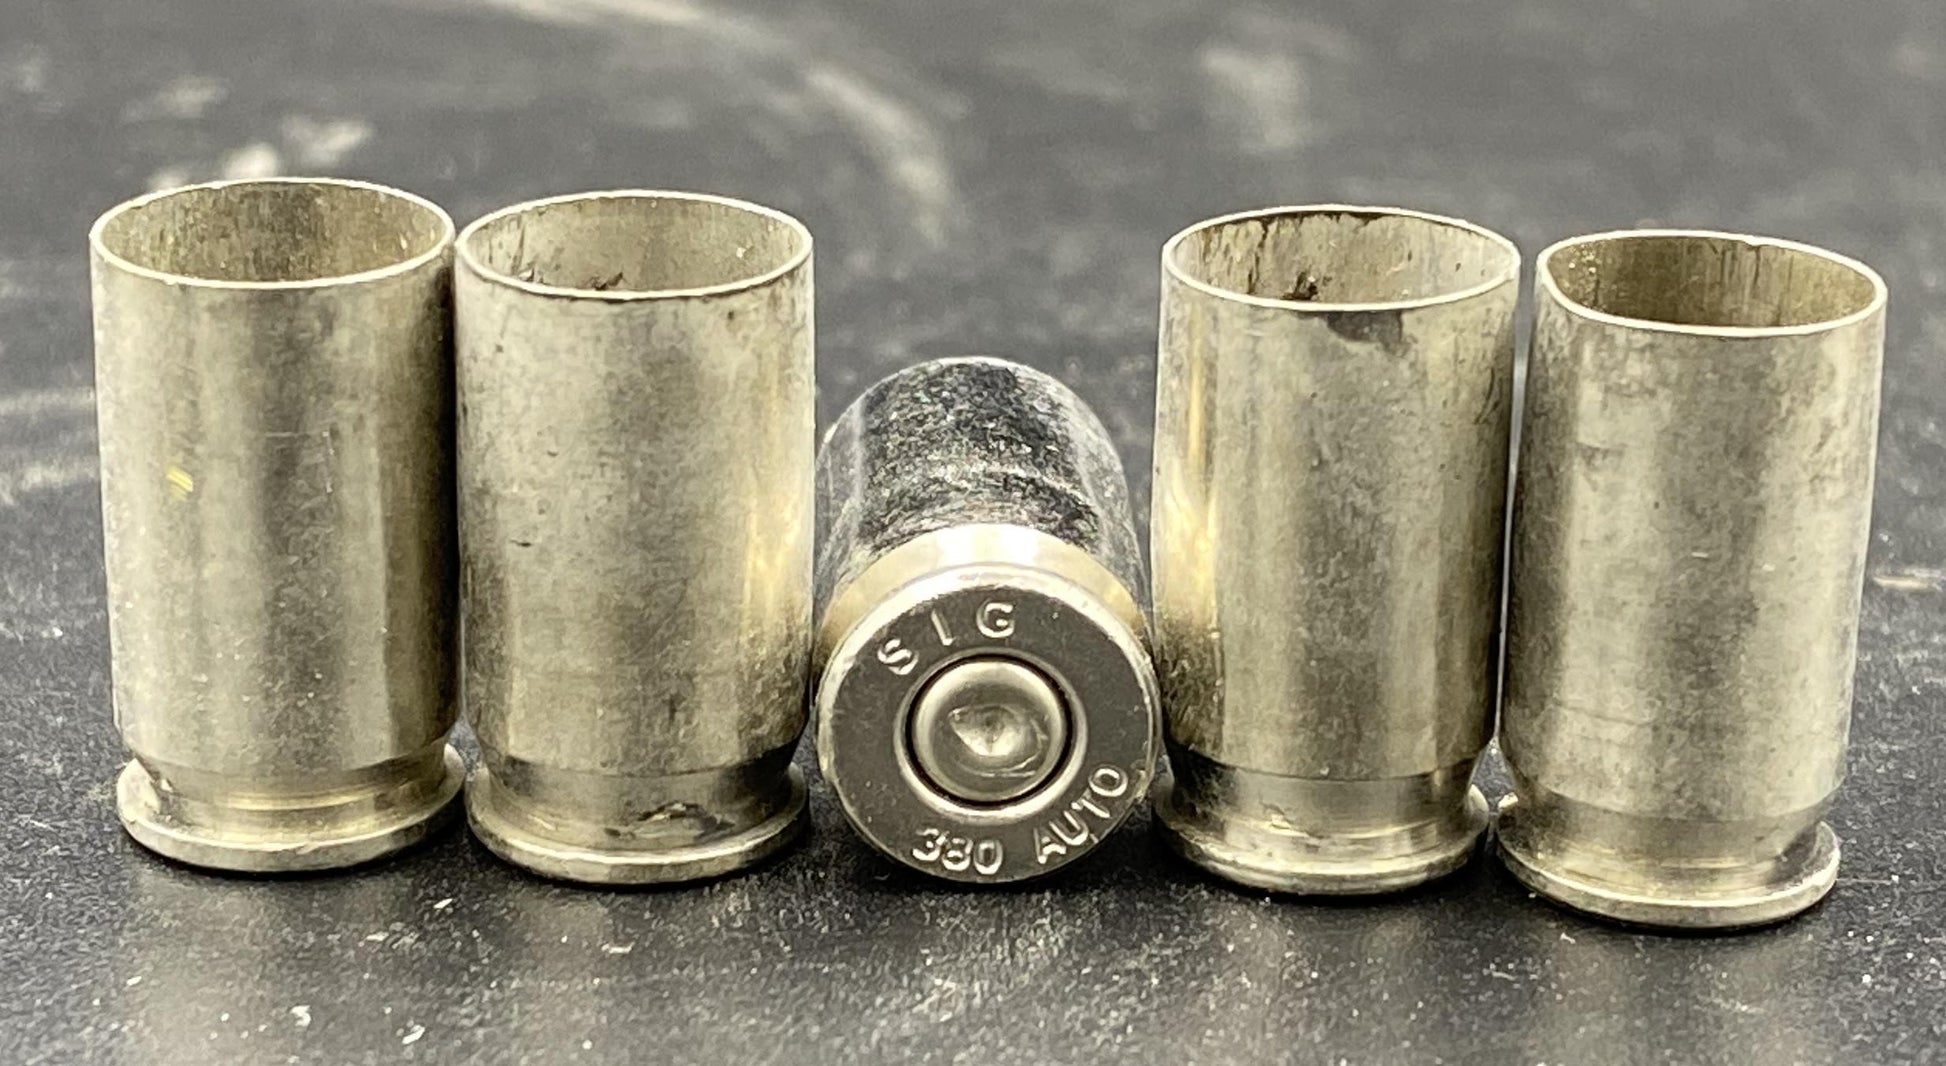 380 Auto once fired pistol nickel. Hand sorted from reputable indoor/military ranges for reloading. Reliable spent casings for precision shooting.